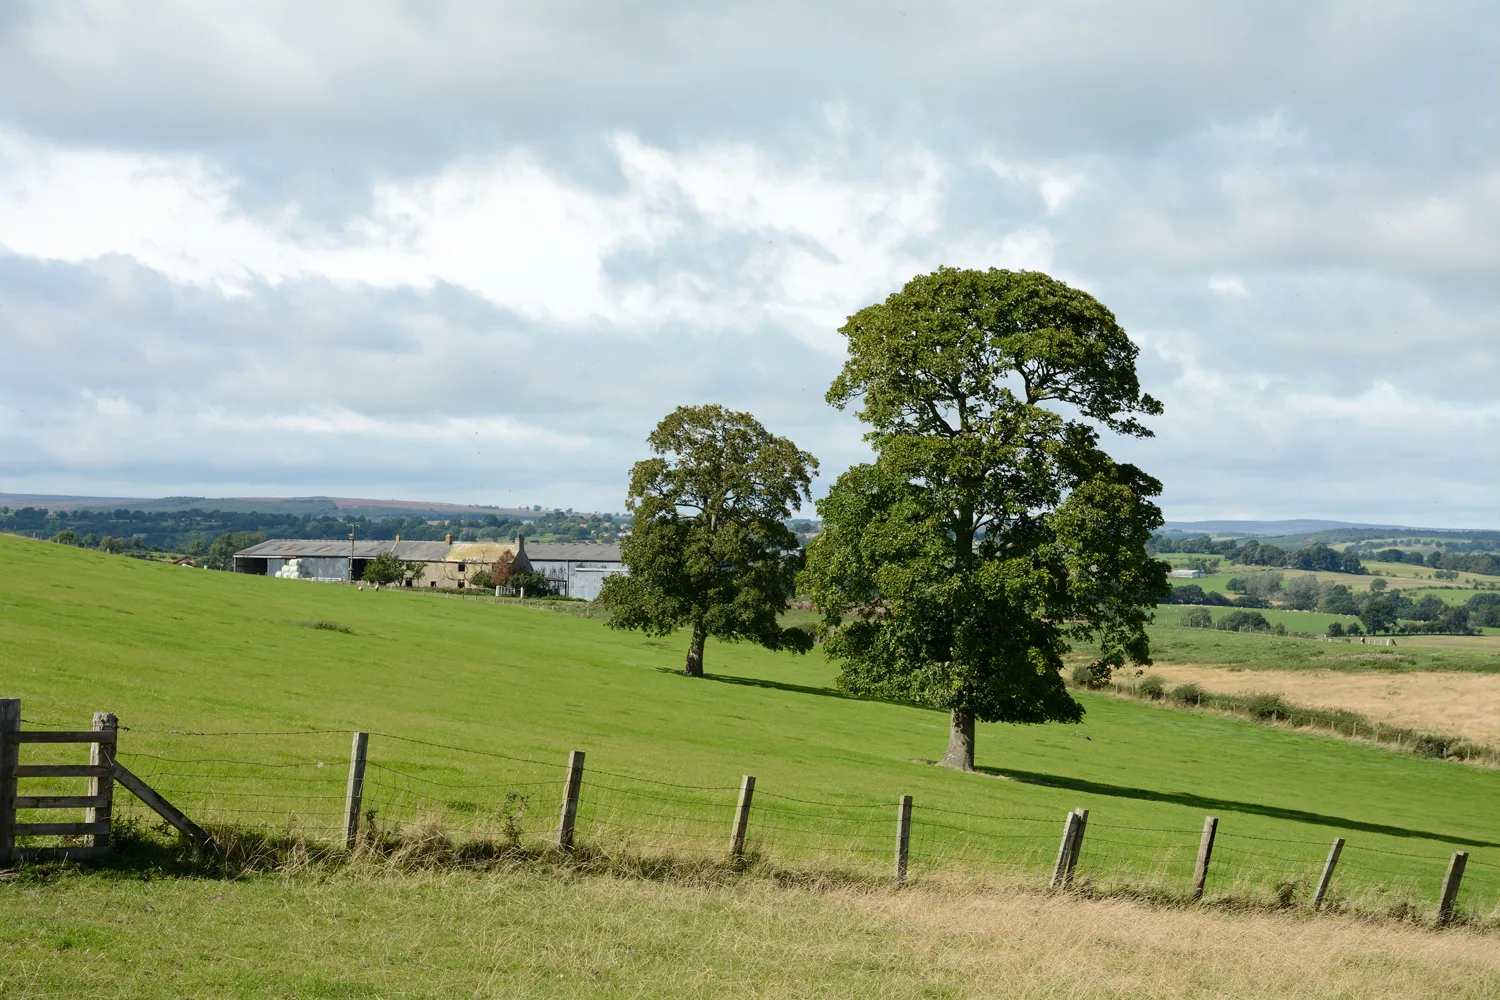 Photo showing: A farm and two trees